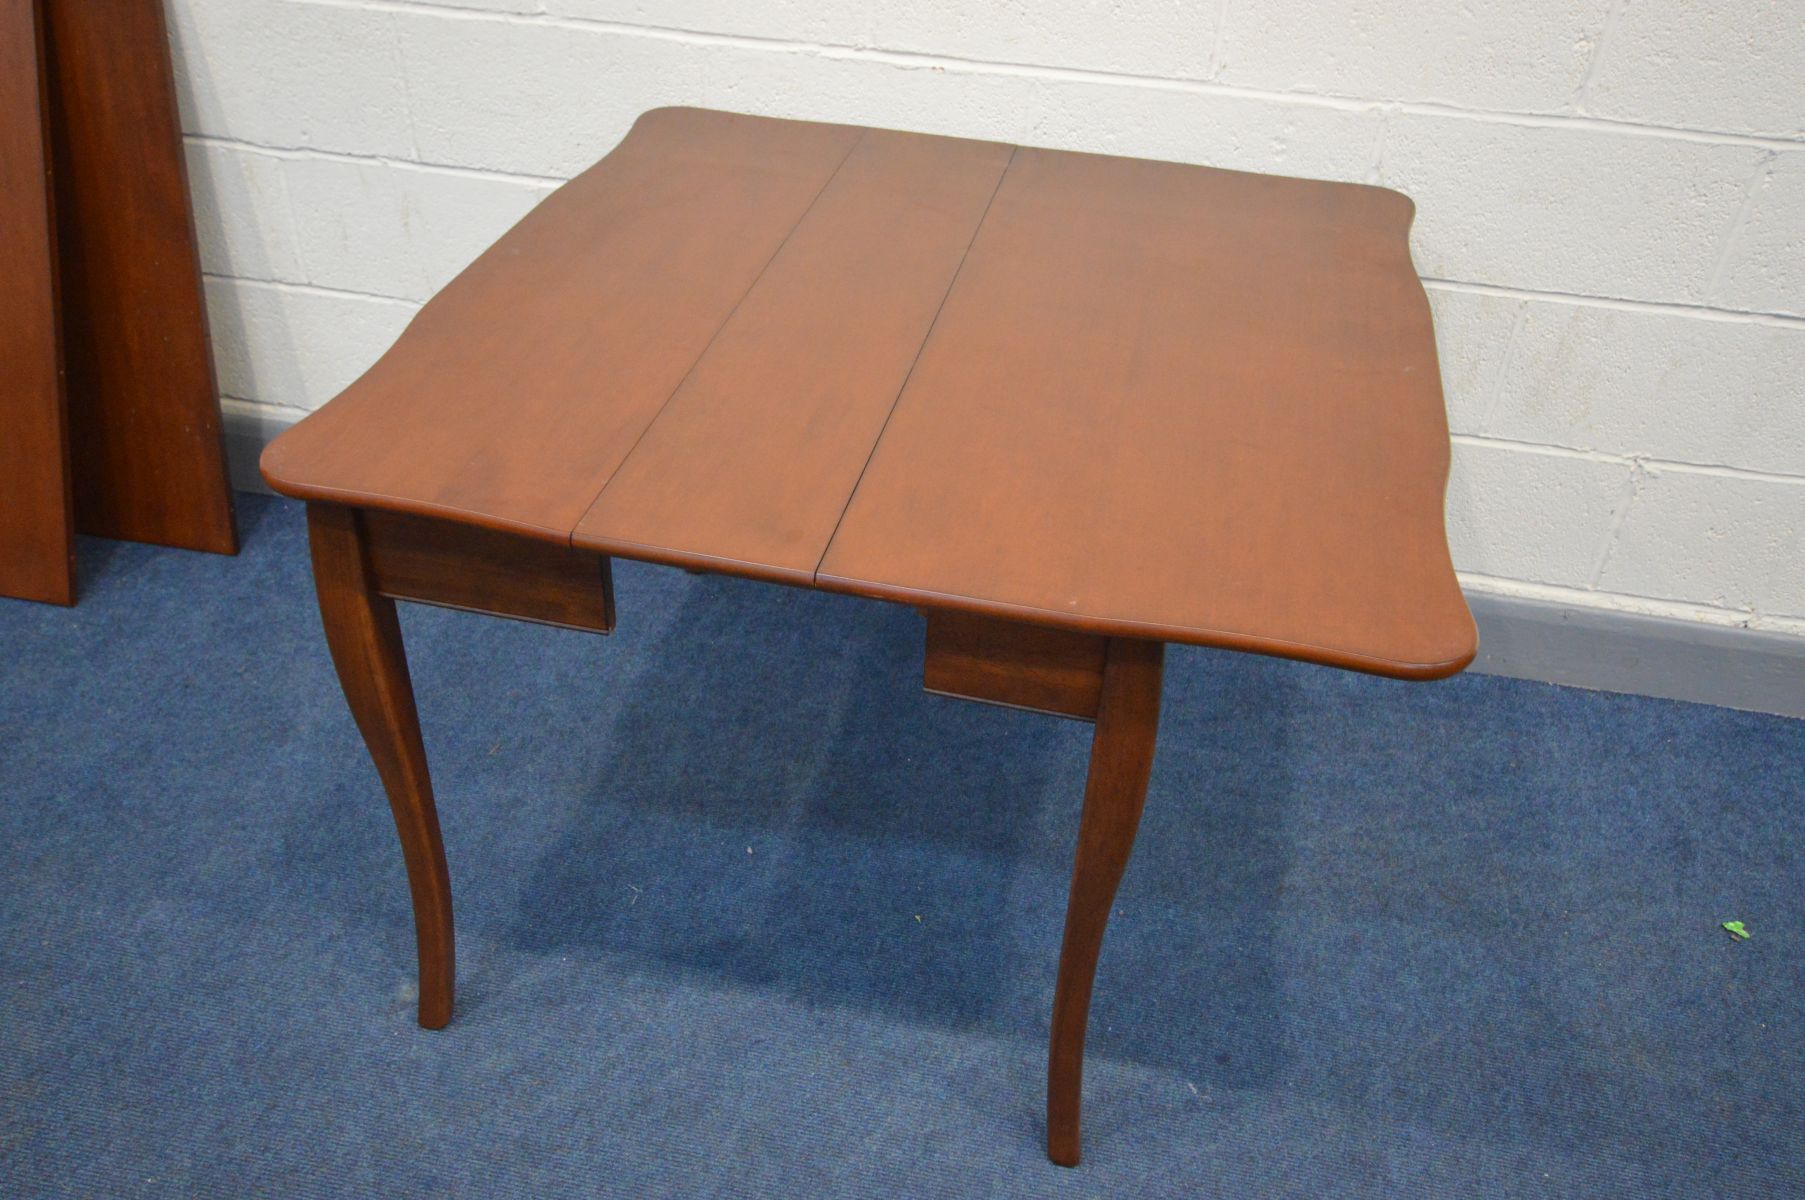 AN CHERRYWOOD EXTENDING DINING TABLE, that folds out from a tea table, with two additional leaves, - Image 3 of 3